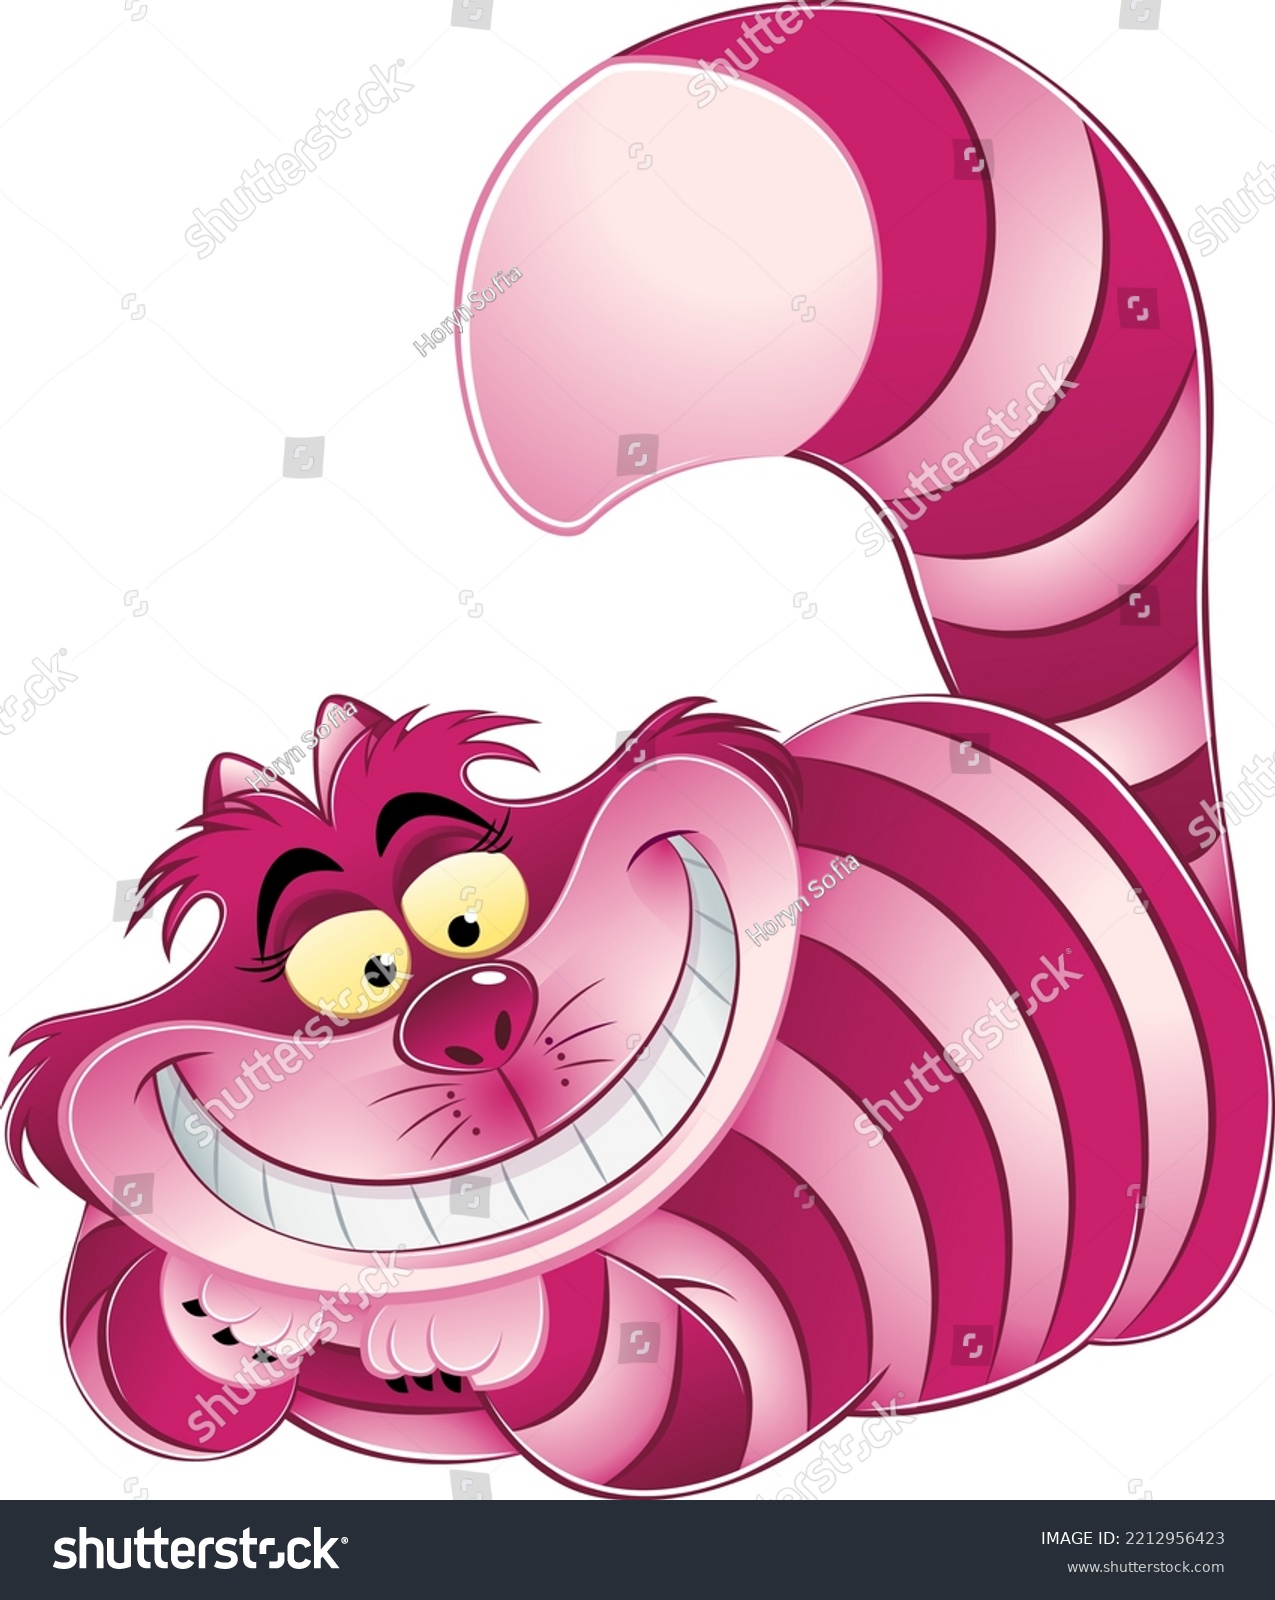 SVG of pink and purple cat laying and smiling with all its teeth. svg